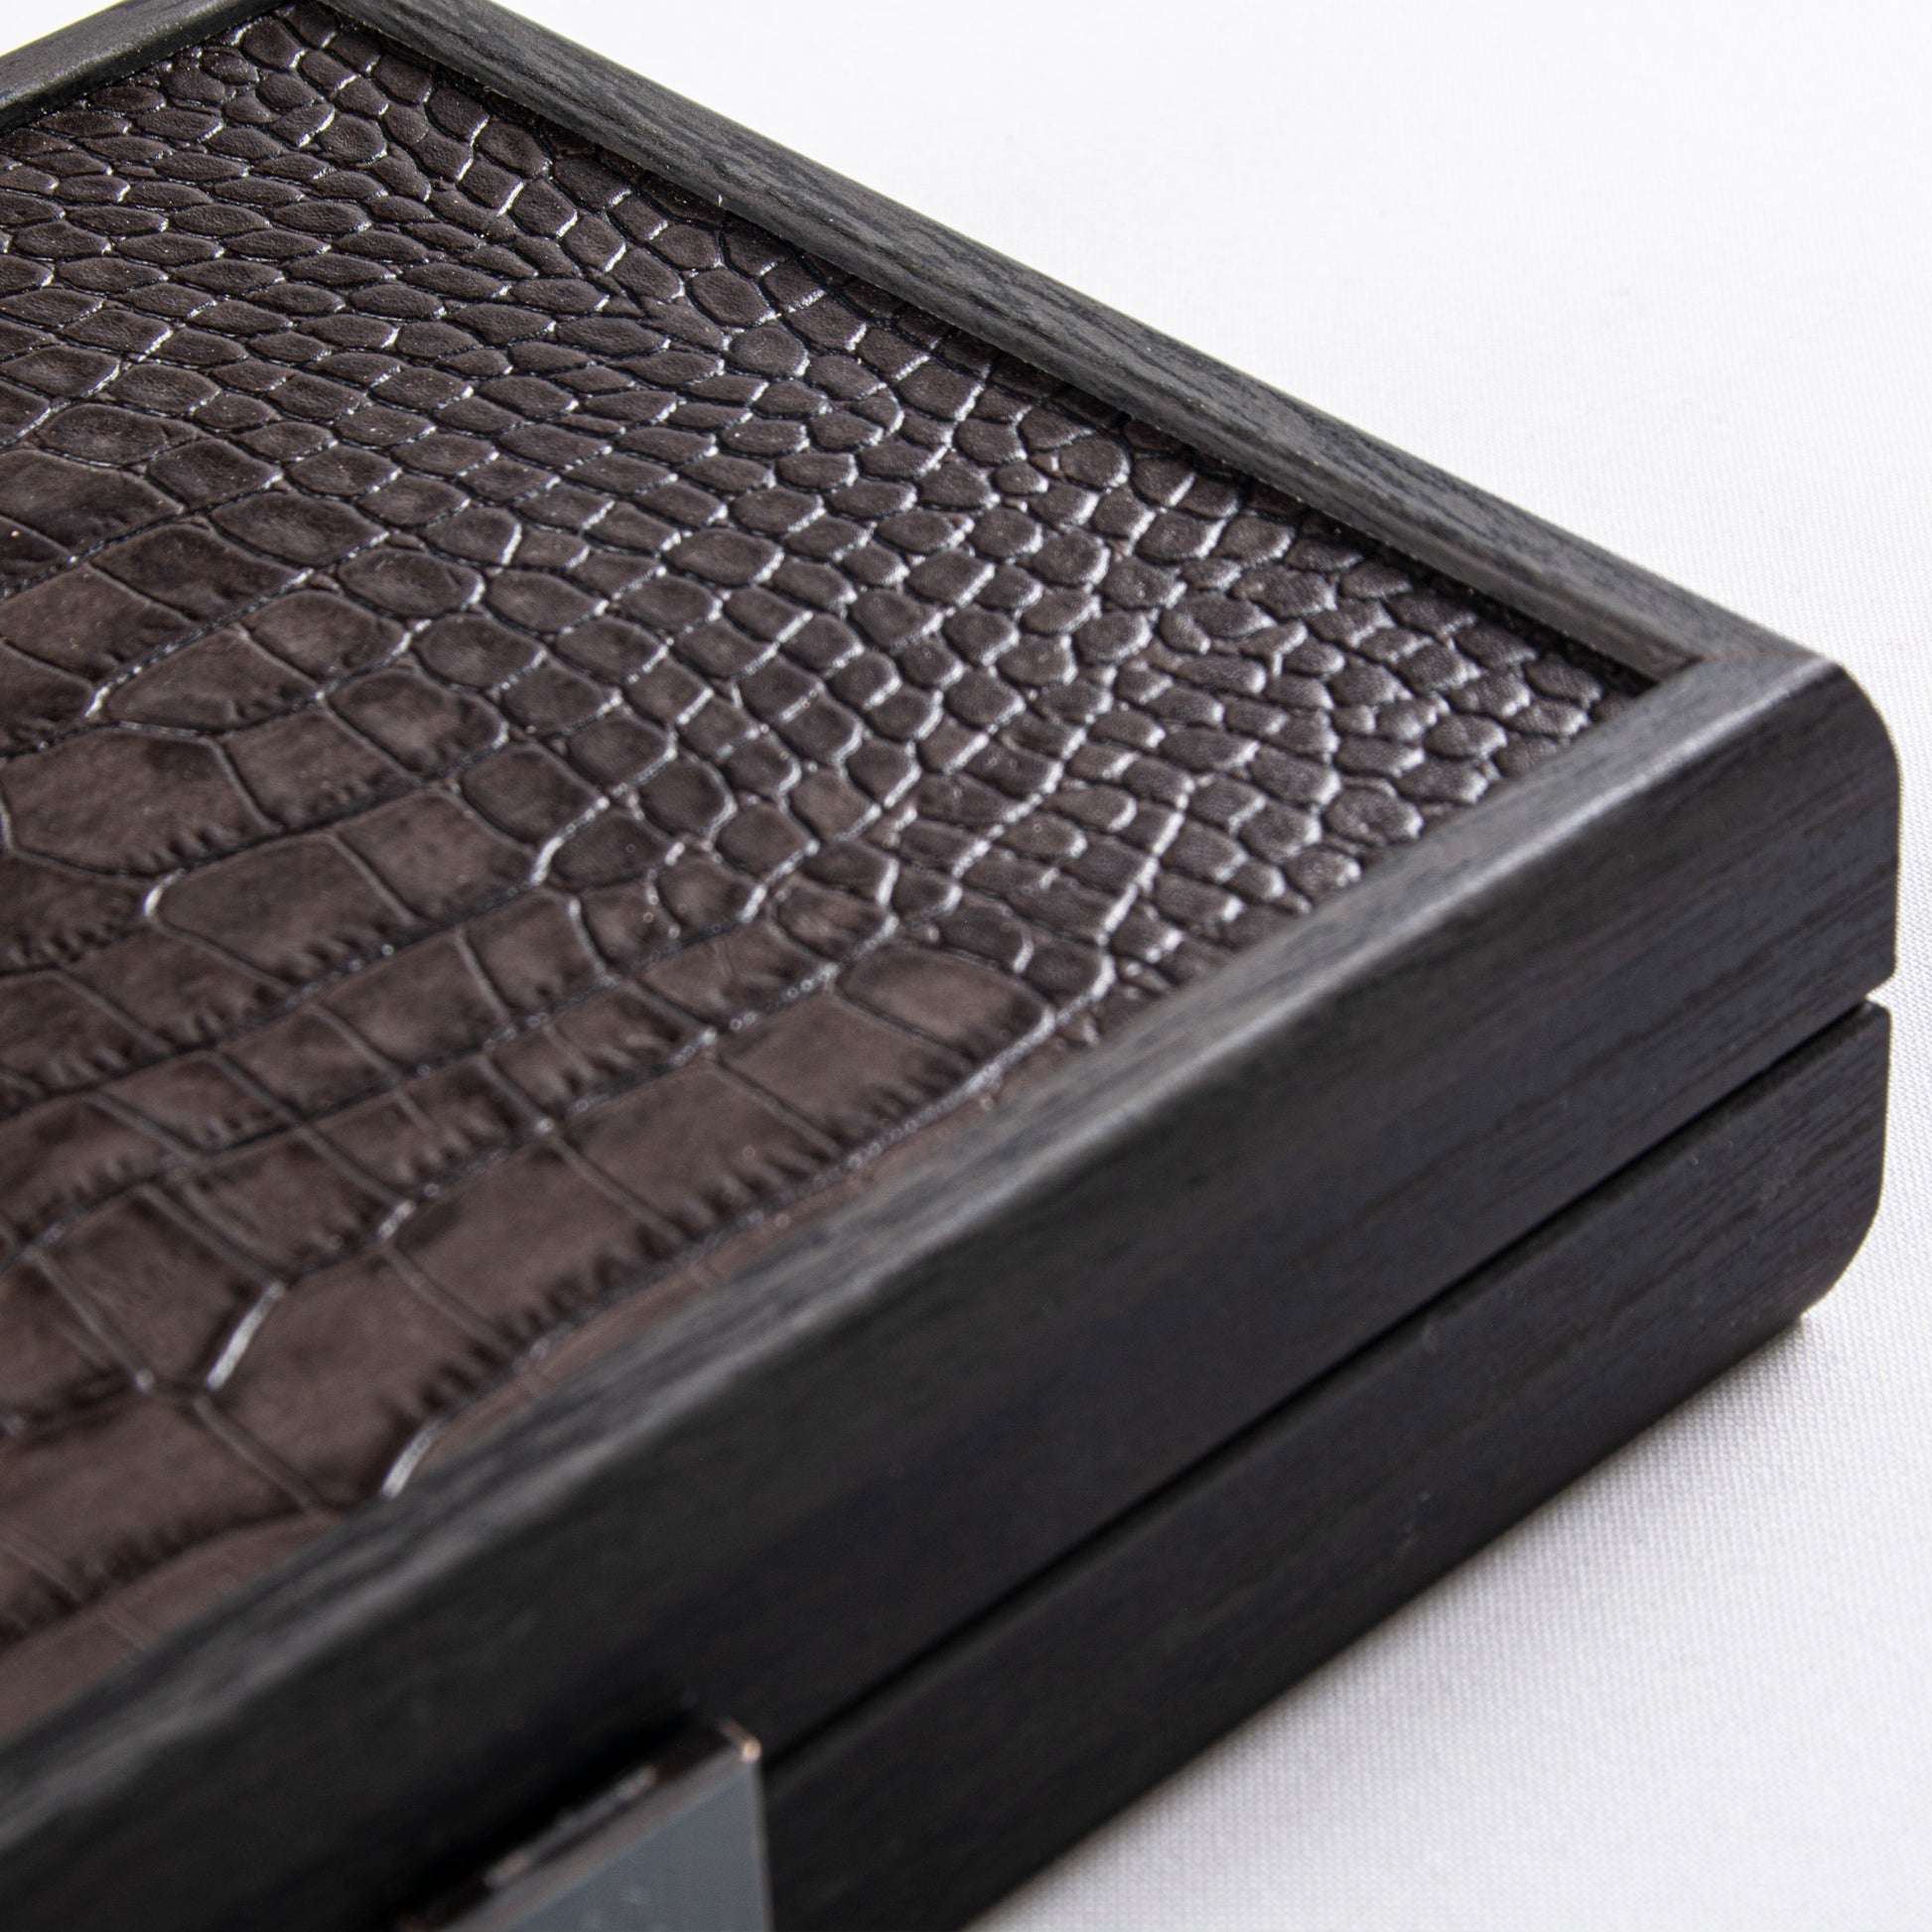 Premium Domino Set in Dark Grey Leather Croc Tote with Wooden Case - Premium Dominoes from MANOPOULOS Chess & Backgammon - Just €62.50! Shop now at MANOPOULOS Chess & Backgammon